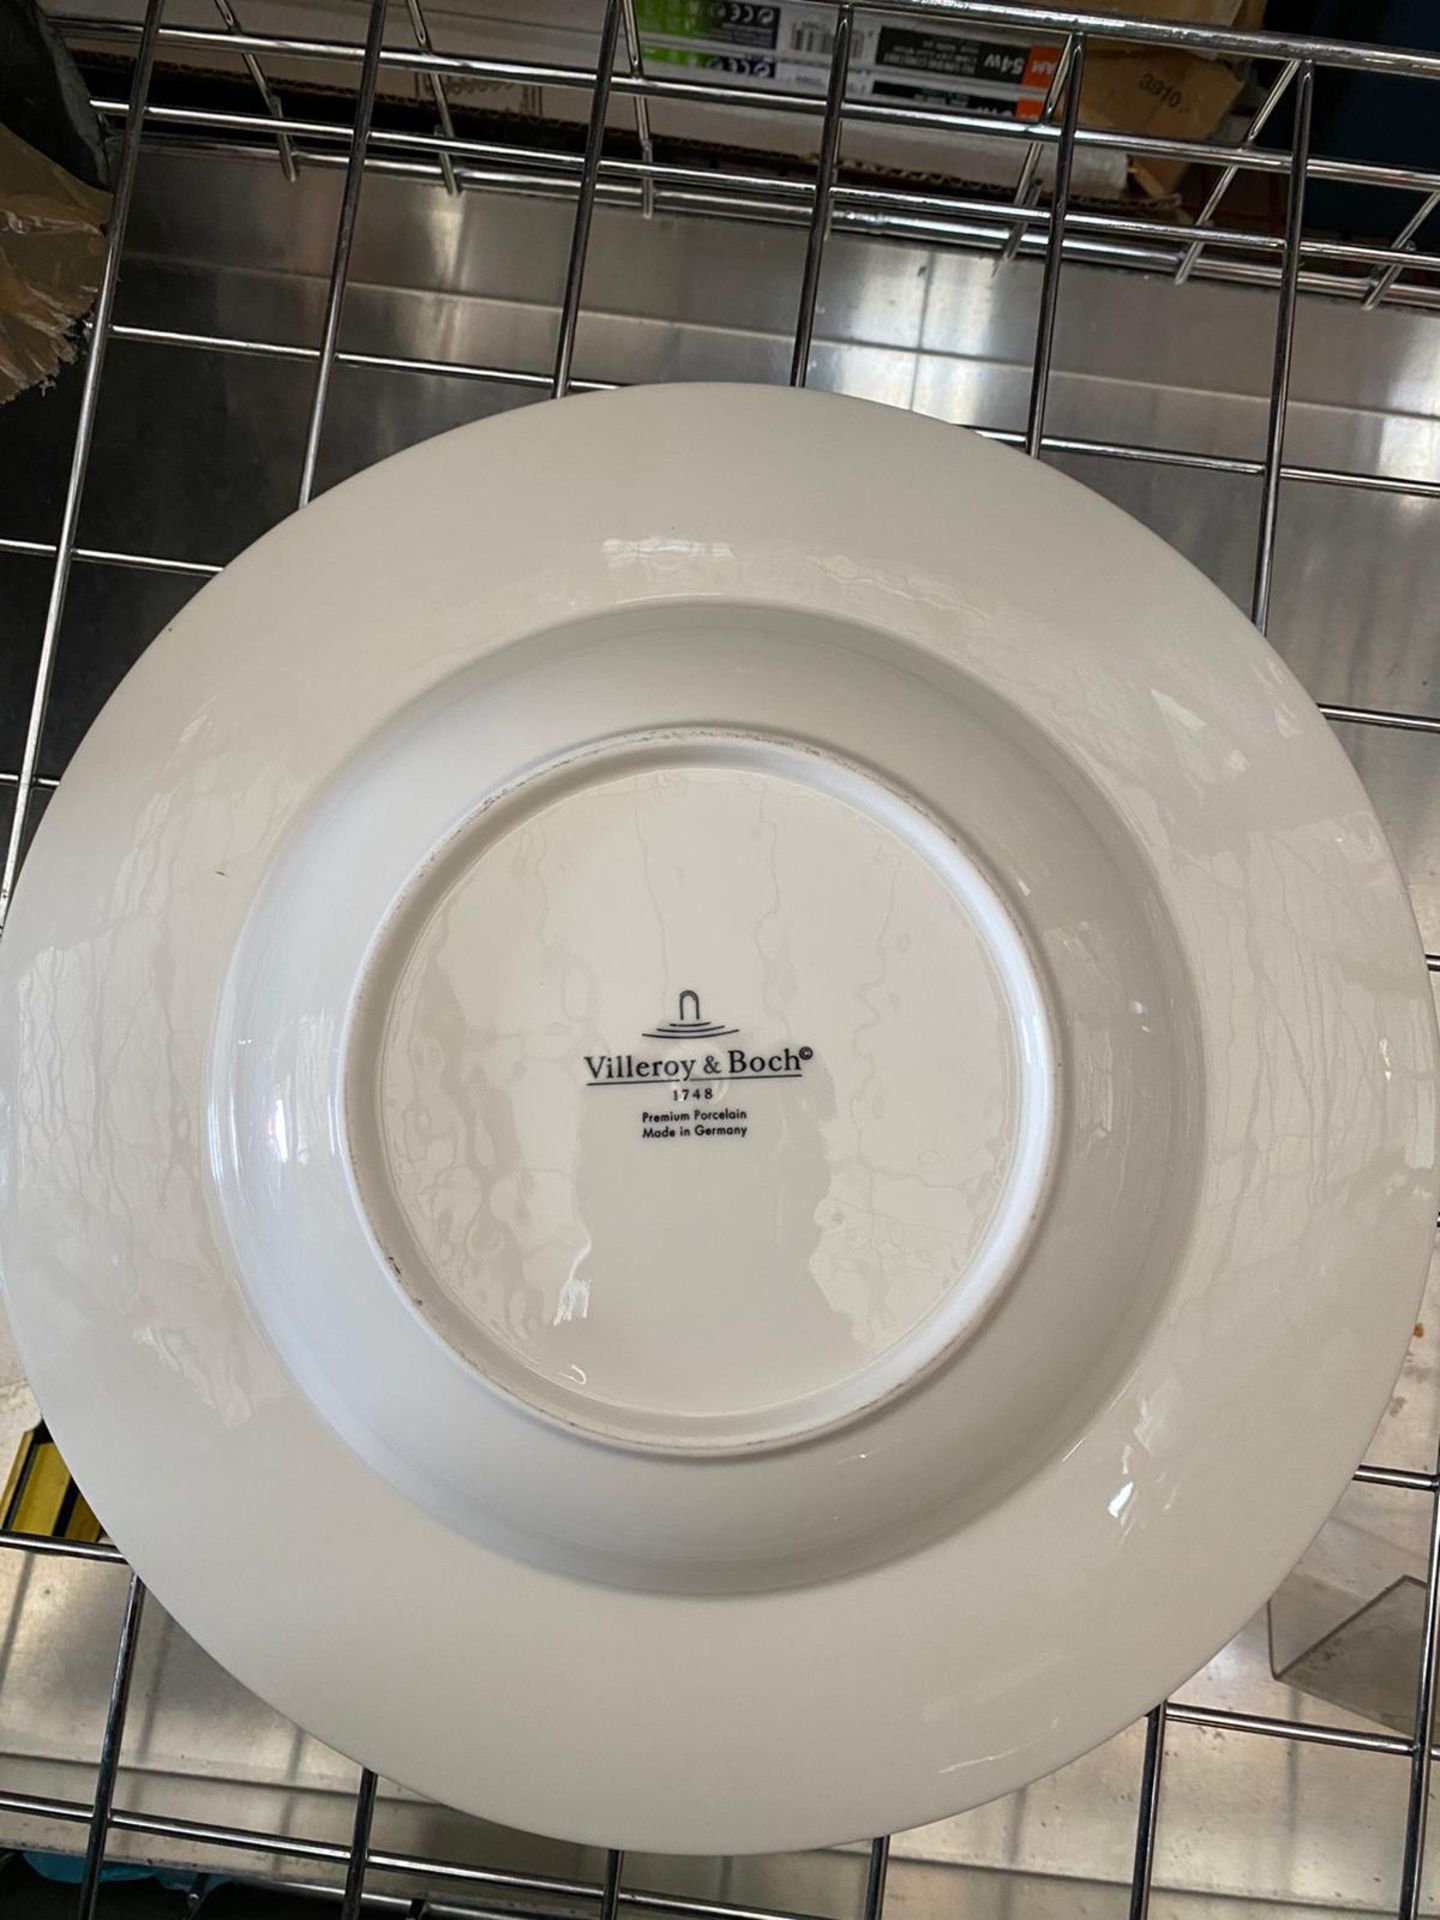 6 x Villeroy & Boch Royal Dinner Plate - 290mm (29cm)- Ref: 1044122620 -New and Boxed - RRP: £125 - Image 4 of 5